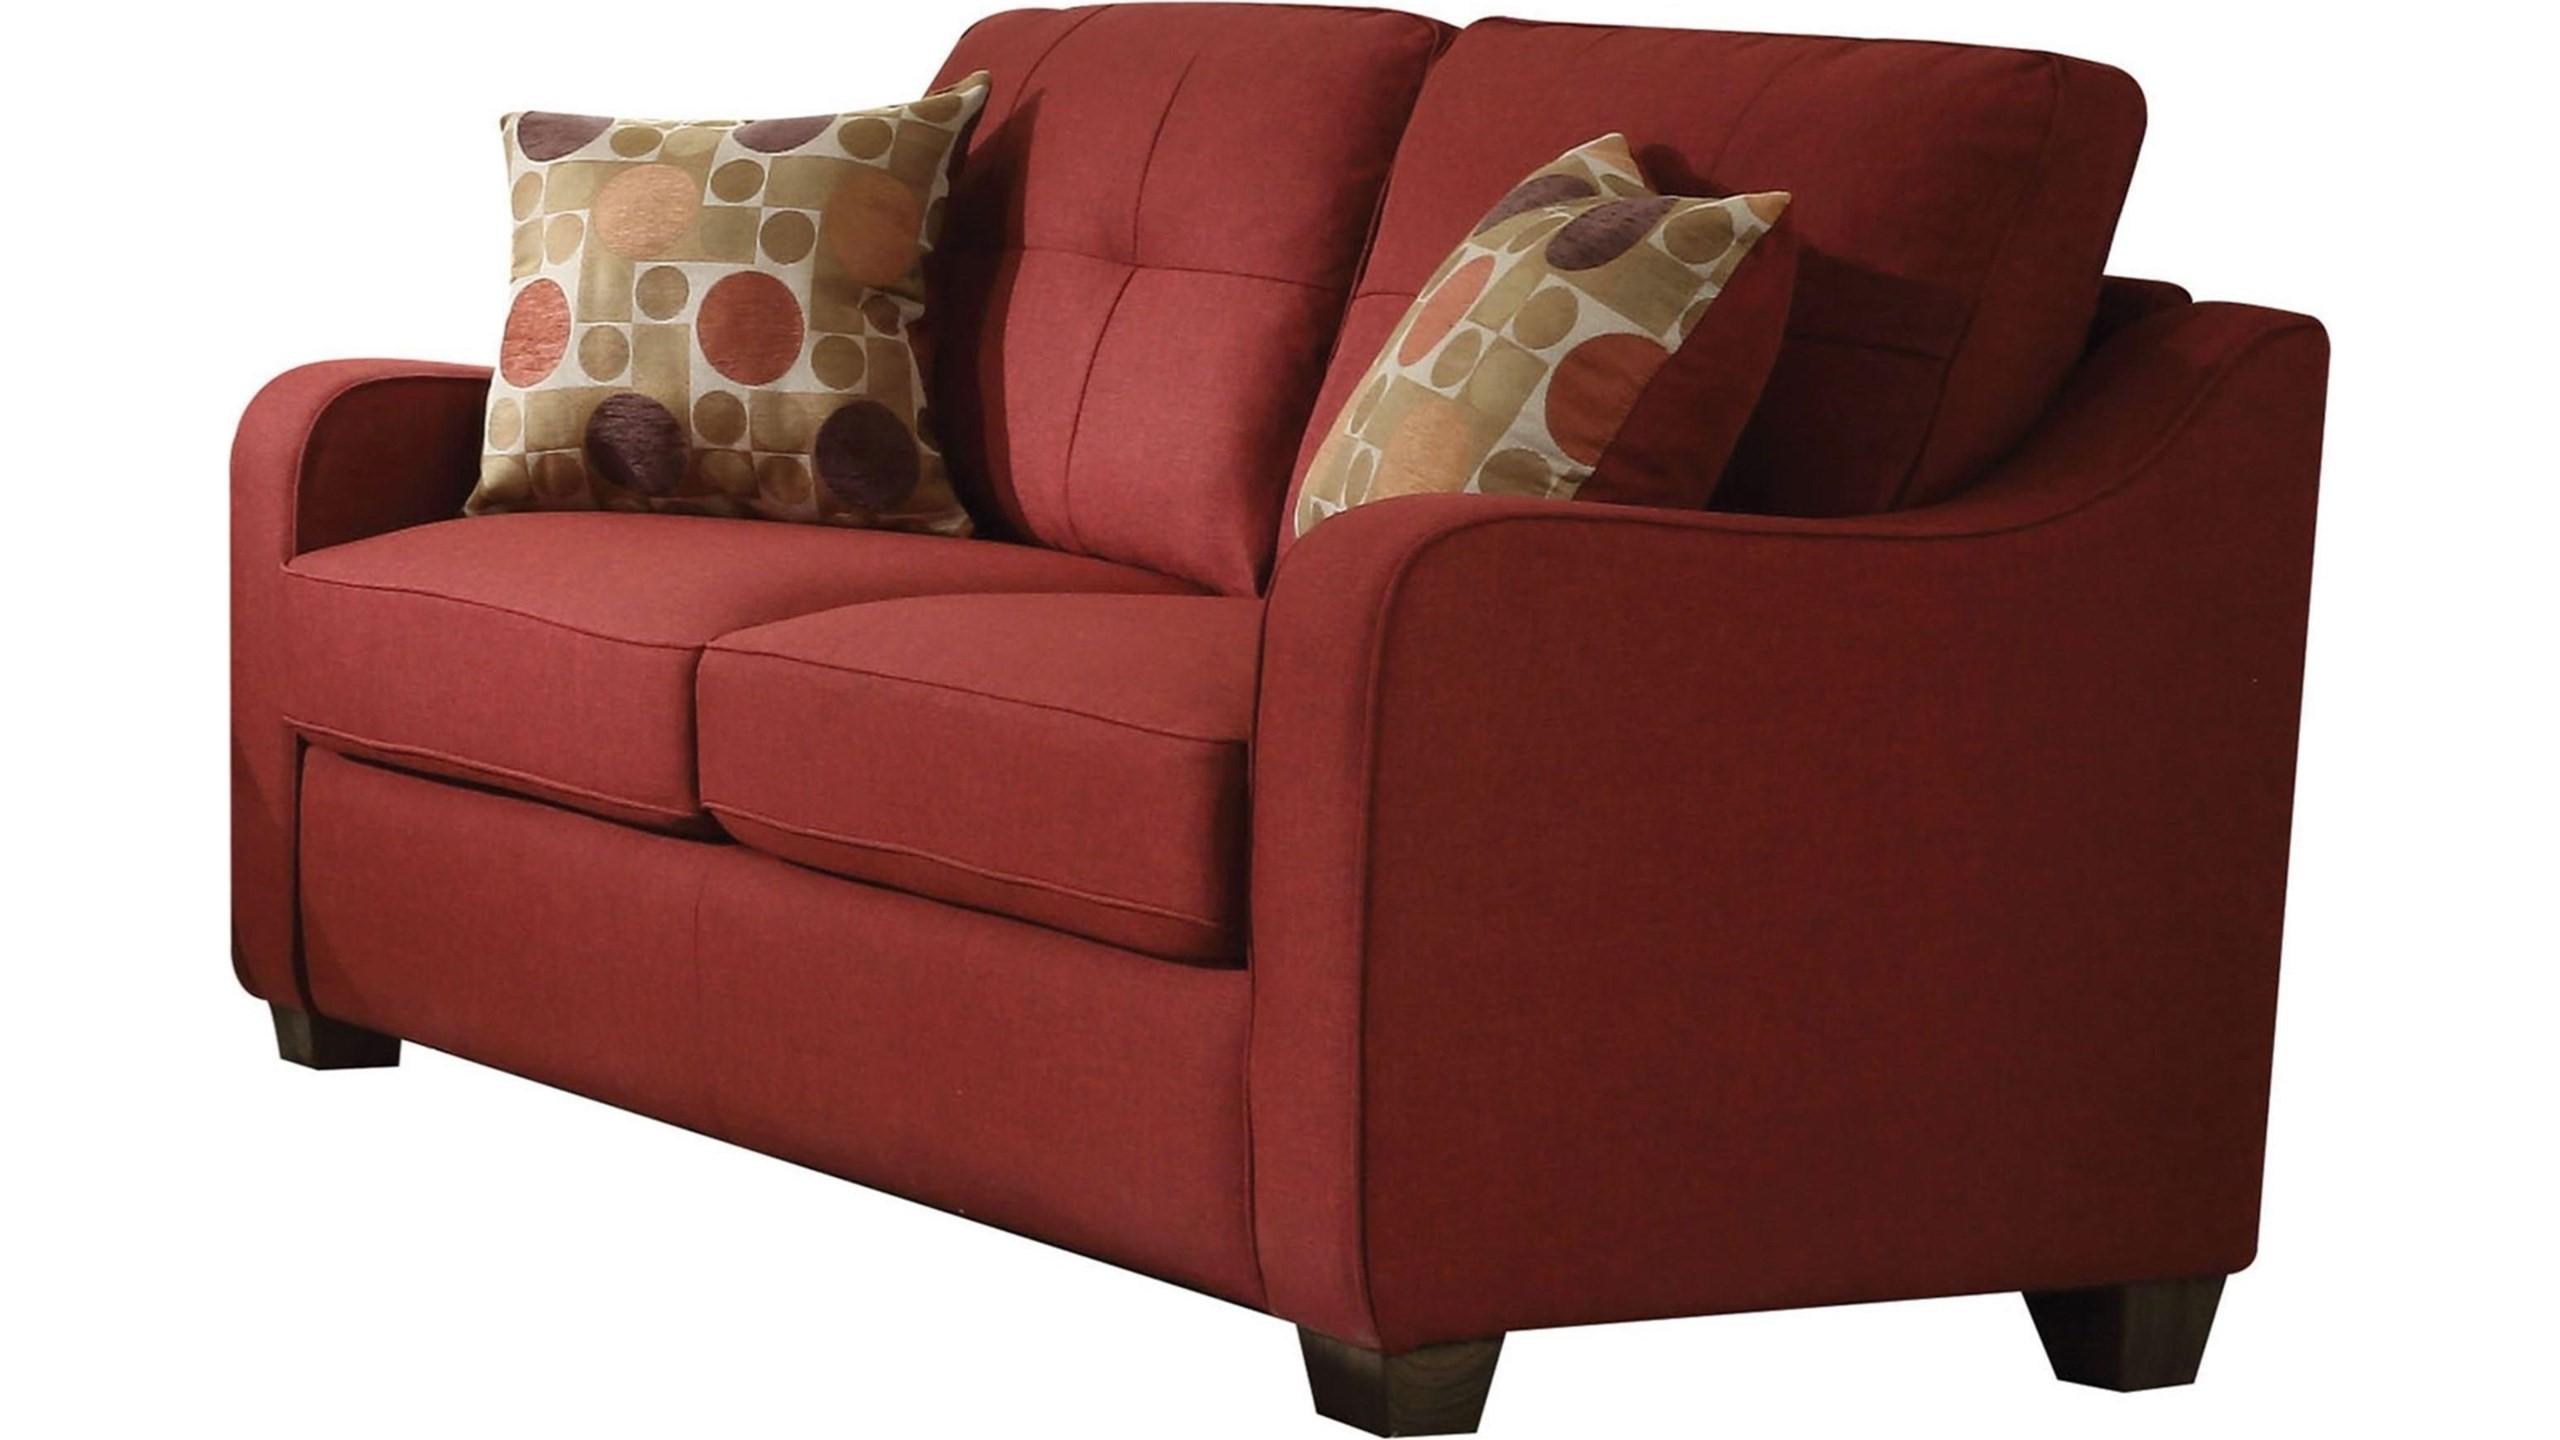 

    
Acme Furniture Cleavon II Sofa Loveseat and Chair Set Red 53560-3pcs
